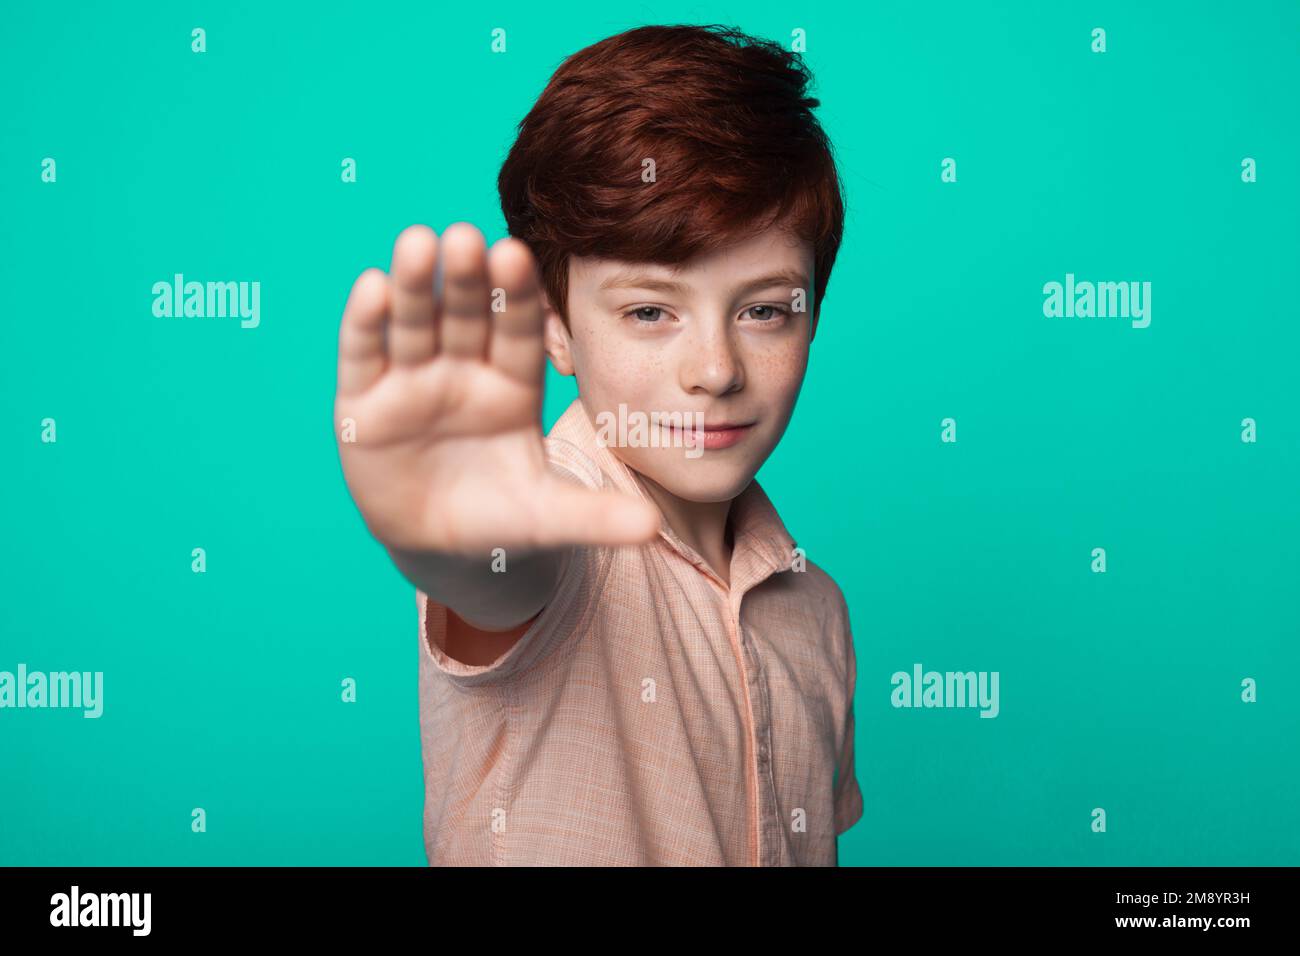 Little boy standing with outstretched hand showing stop sign, preventing you isolated over green backgrpund. Stock Photo